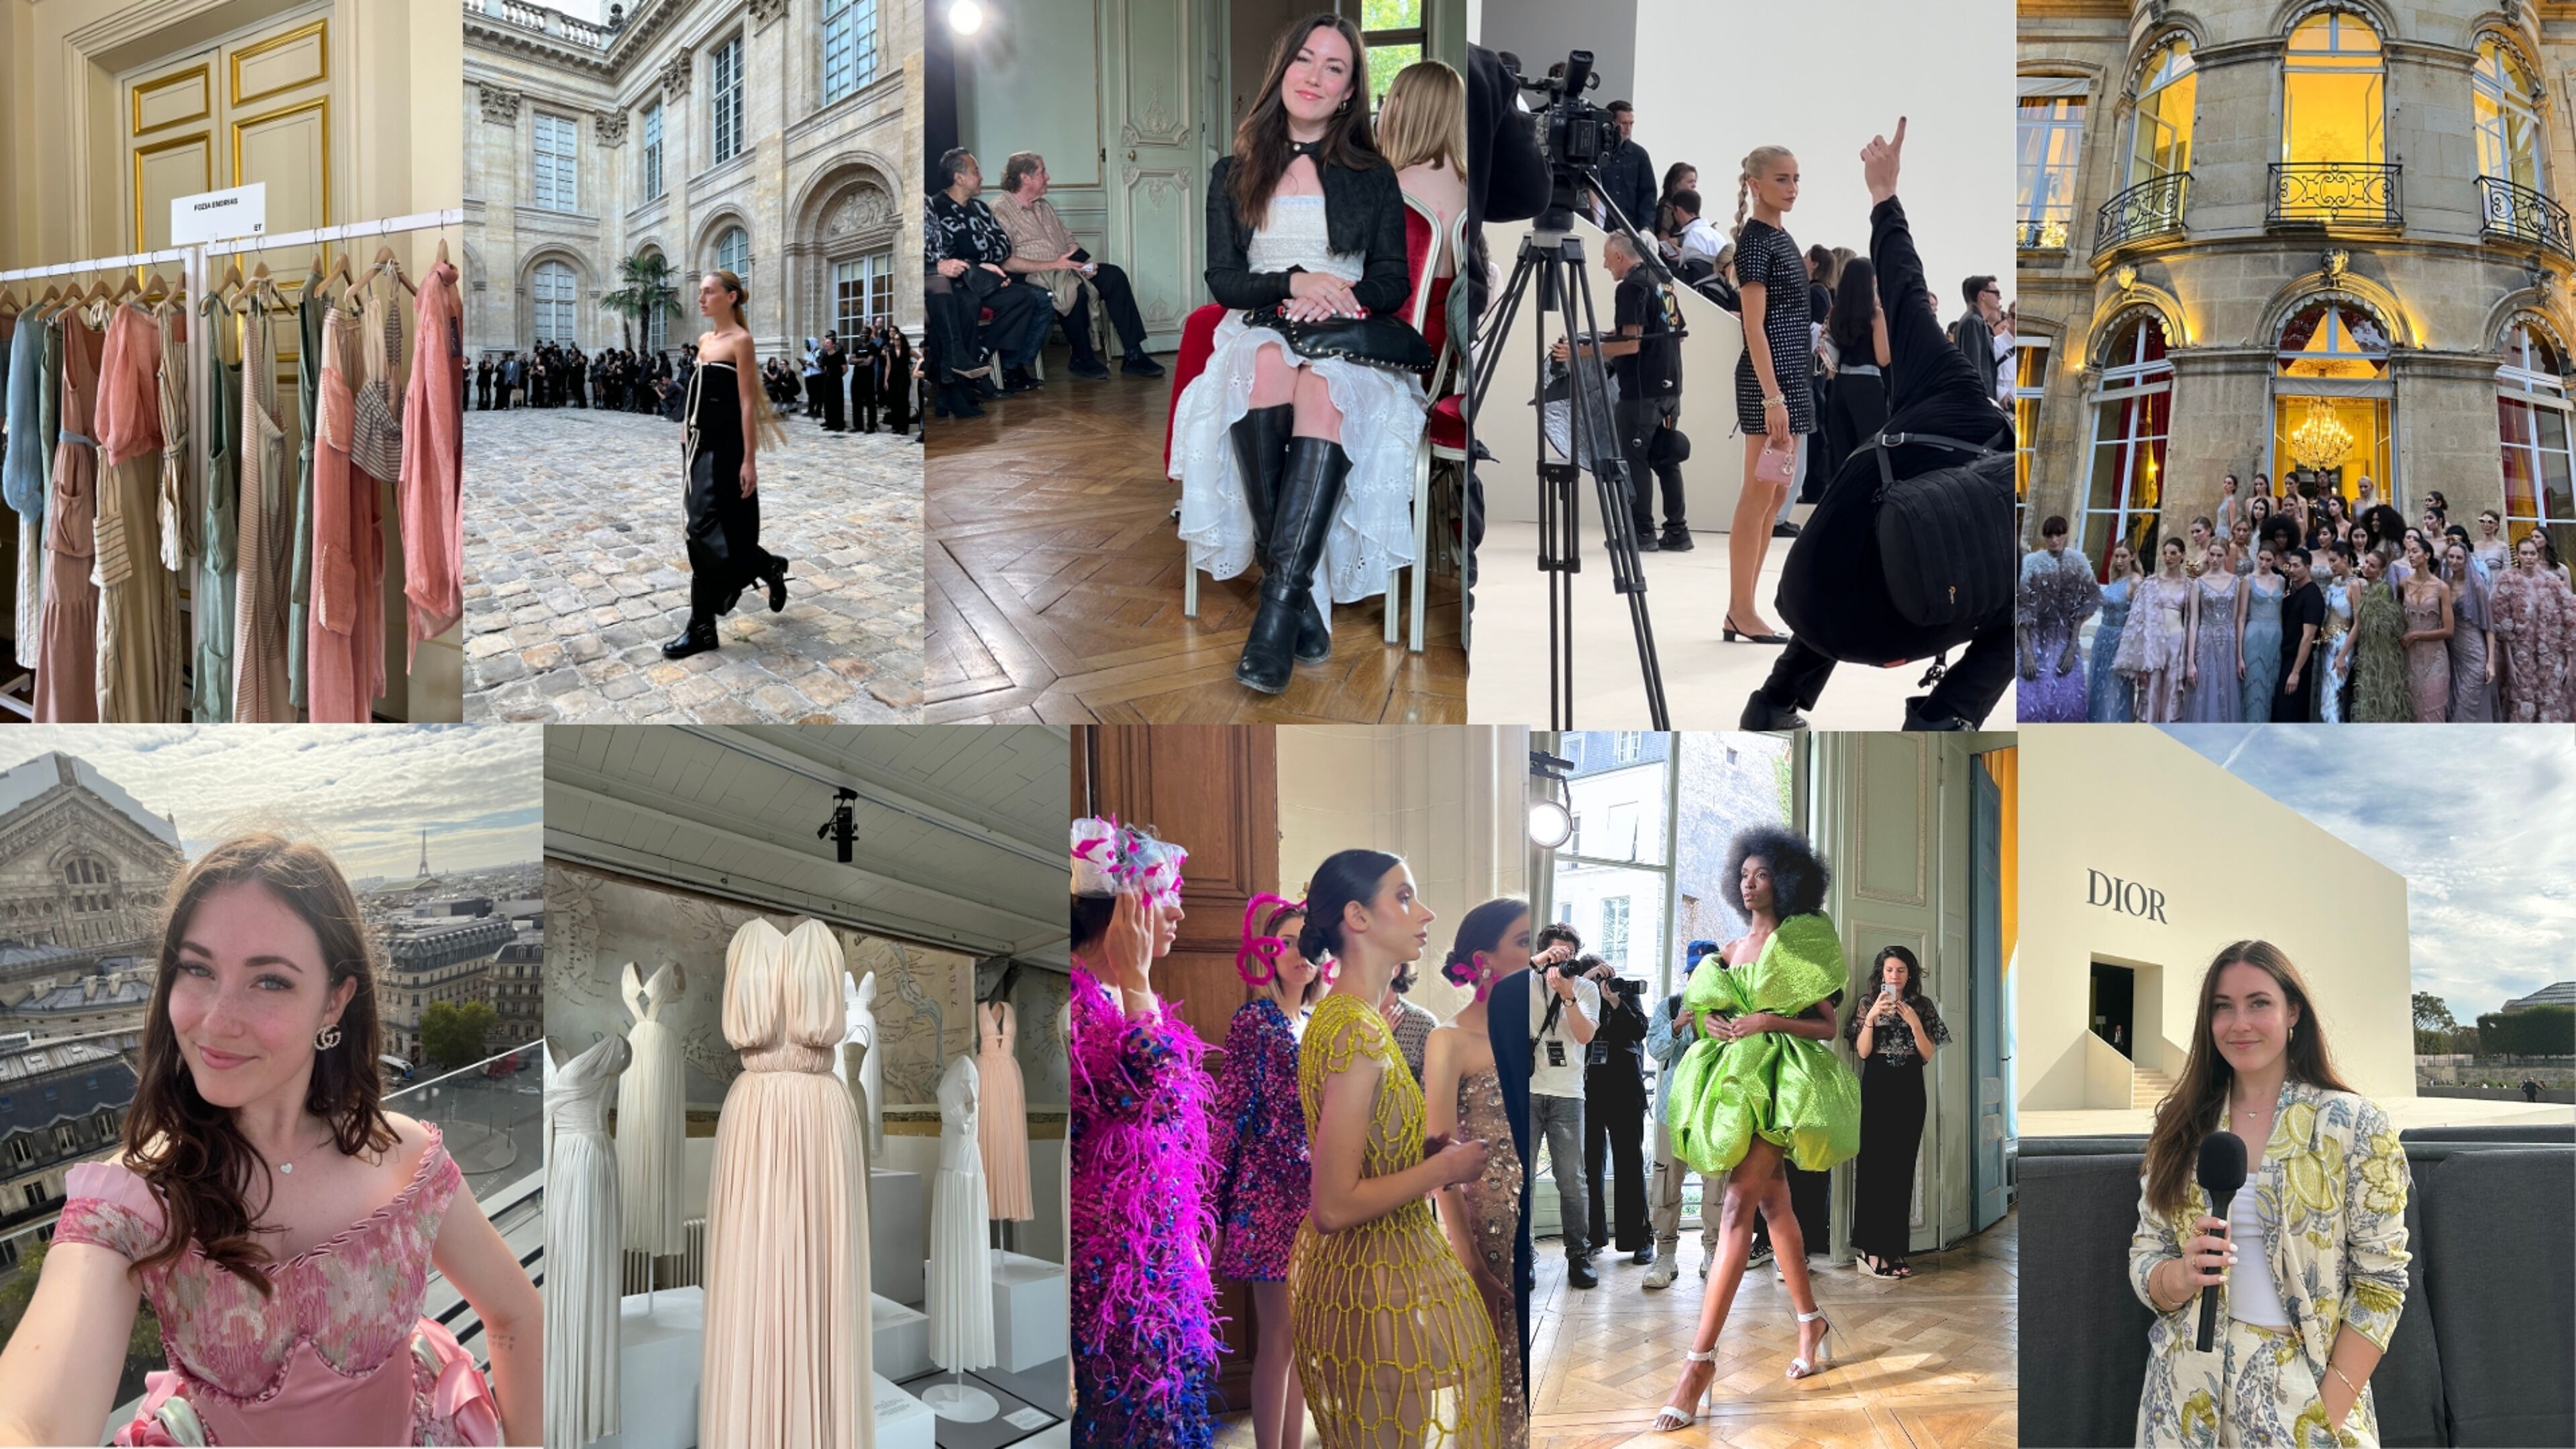 A collage of Fashion Week's vibrant scenes, including runway shows, designer collections, and a reporter on location.